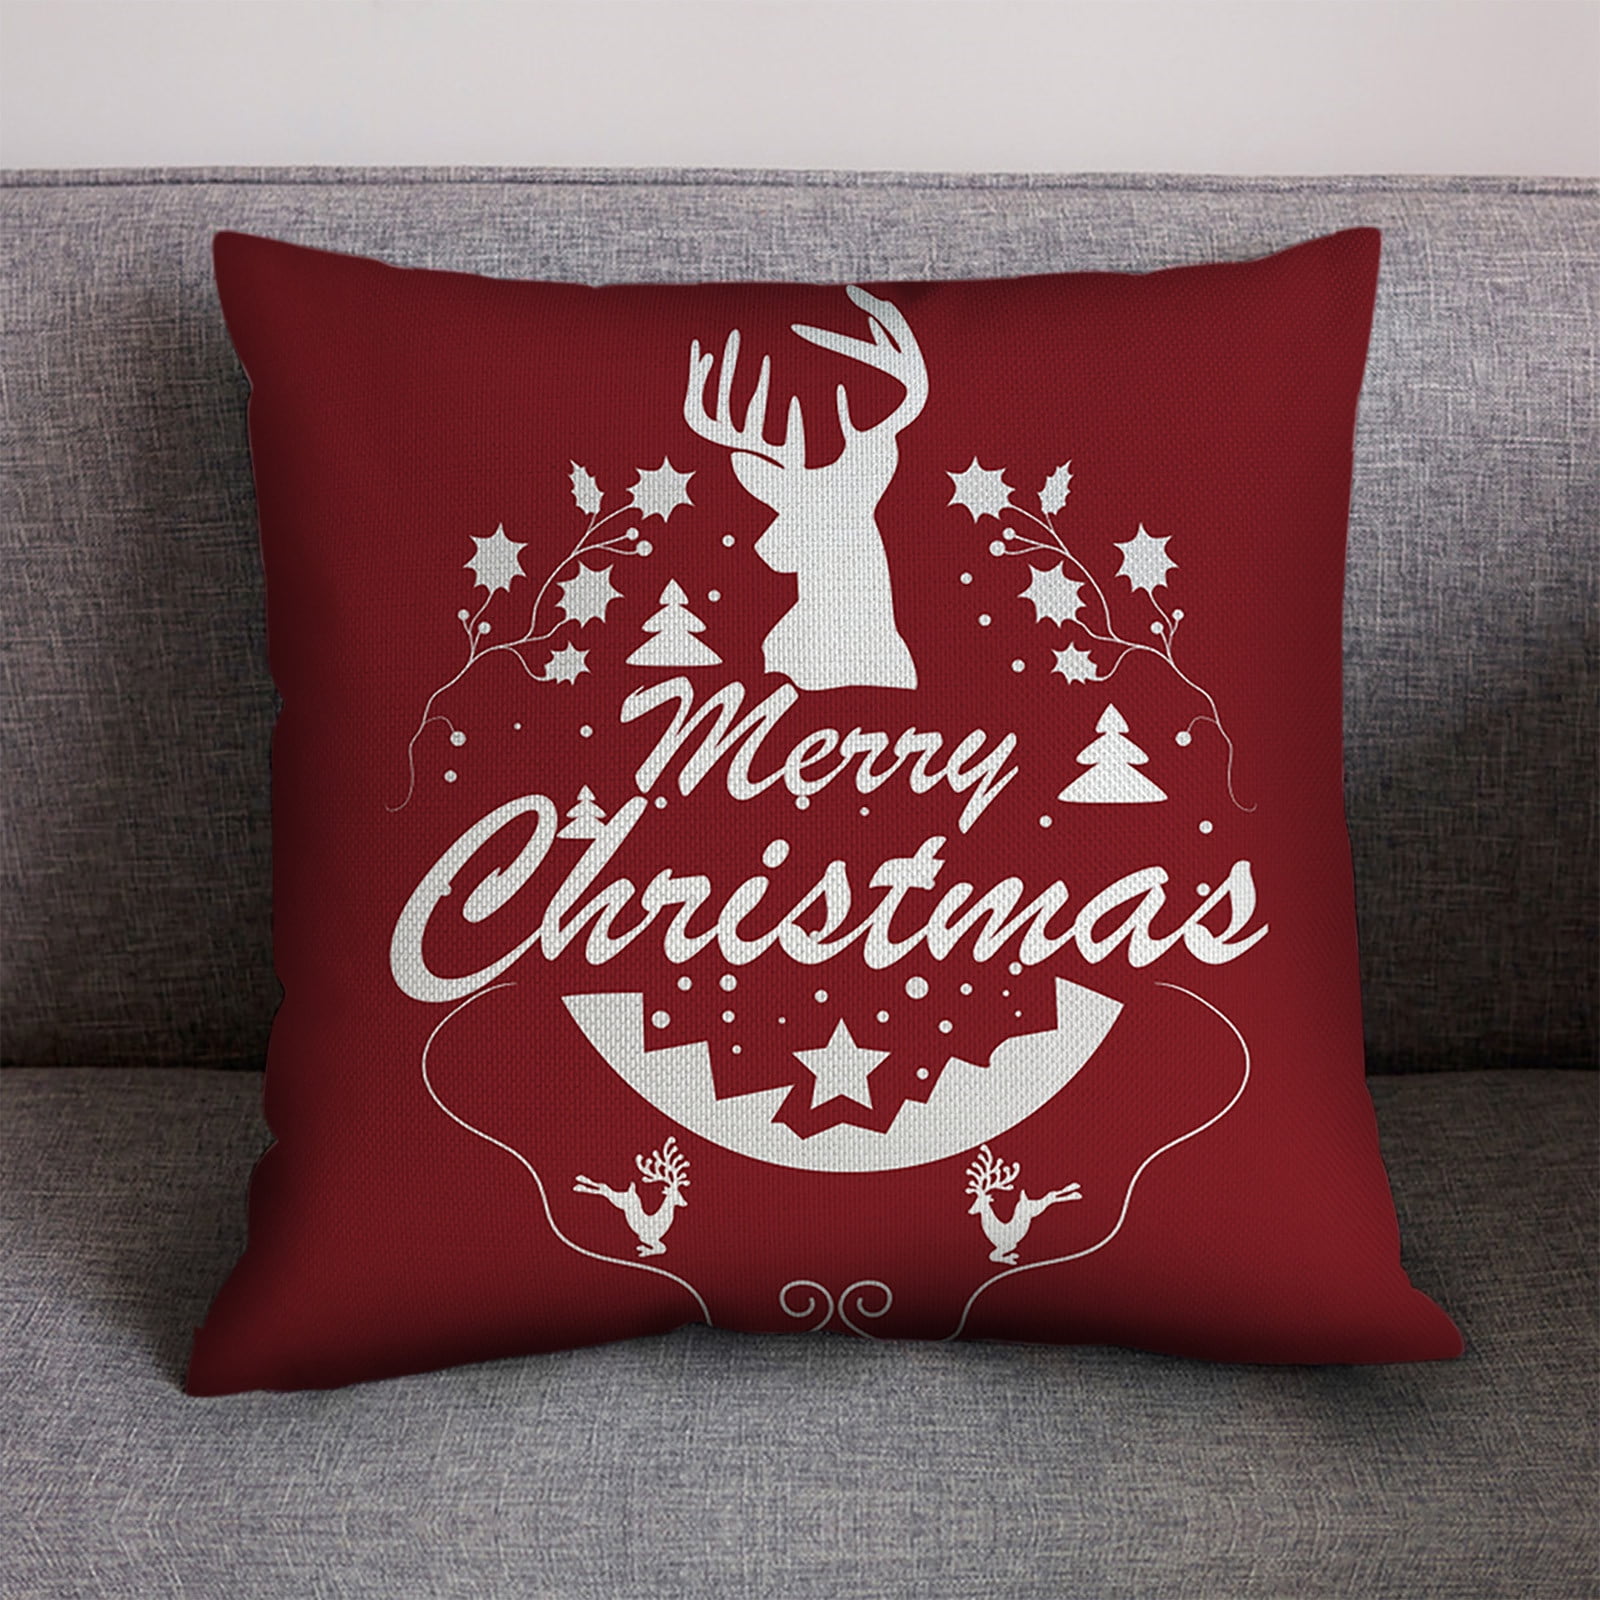 Details about   1pc Sofa Cover Christmas Pillowcase Chair Cover for Bedroom Household Office 